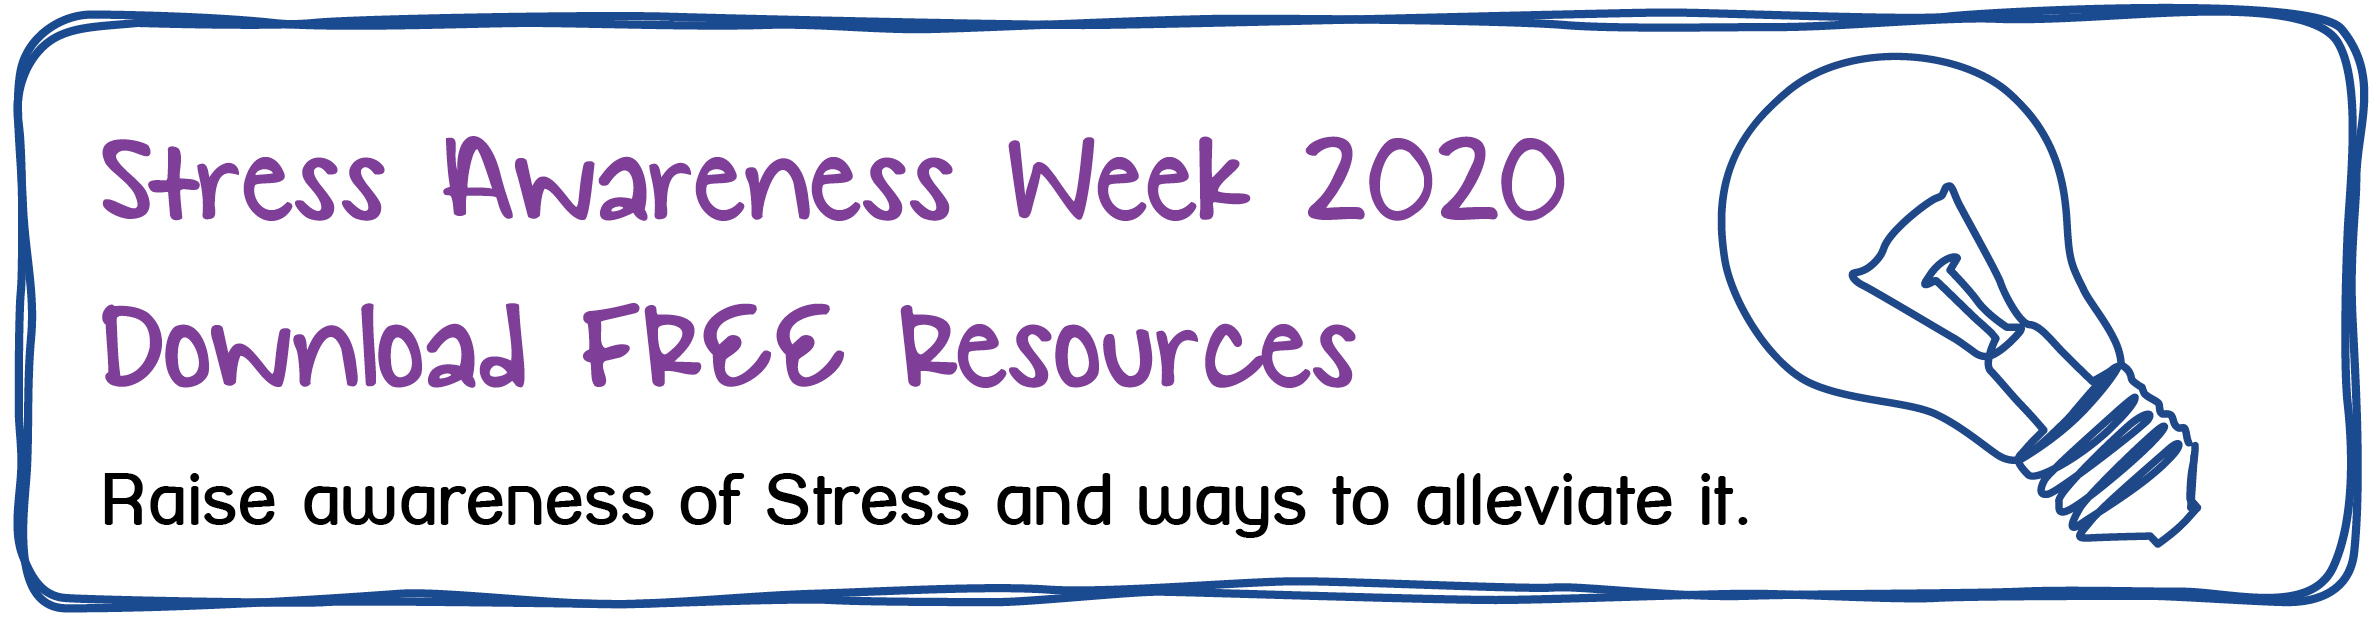 Stress Awareness Week 2020 Download FREE Resources. Raise awareness of Stress and ways to alleviate it.